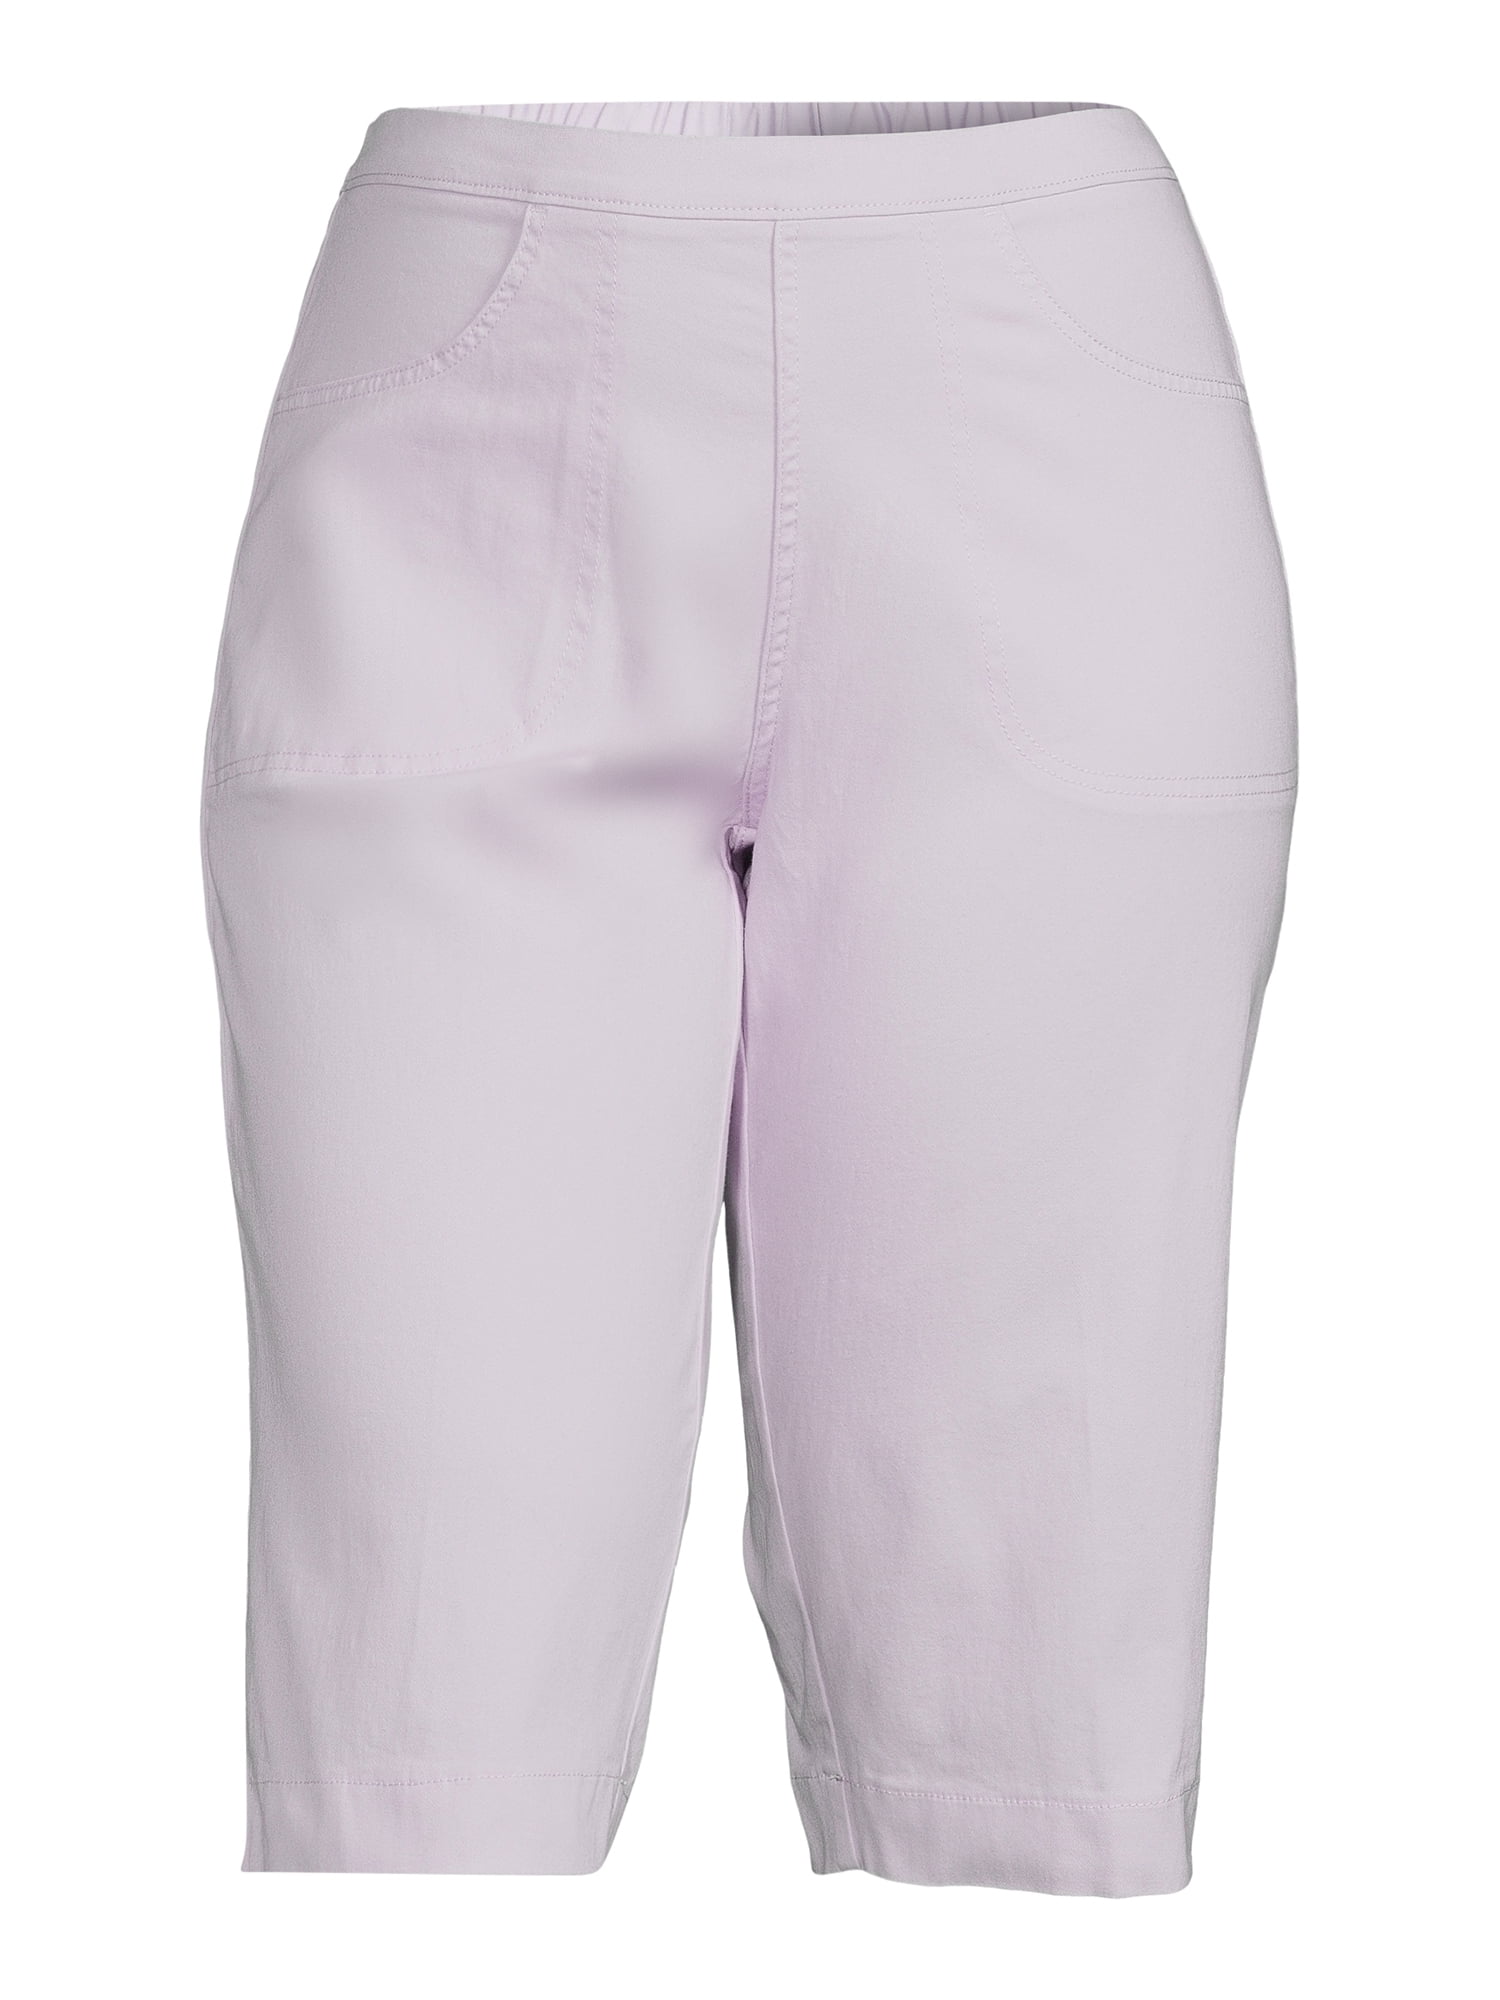 Just My Size Pull On Pink Capris Womens Size 1X (16W) High Rise